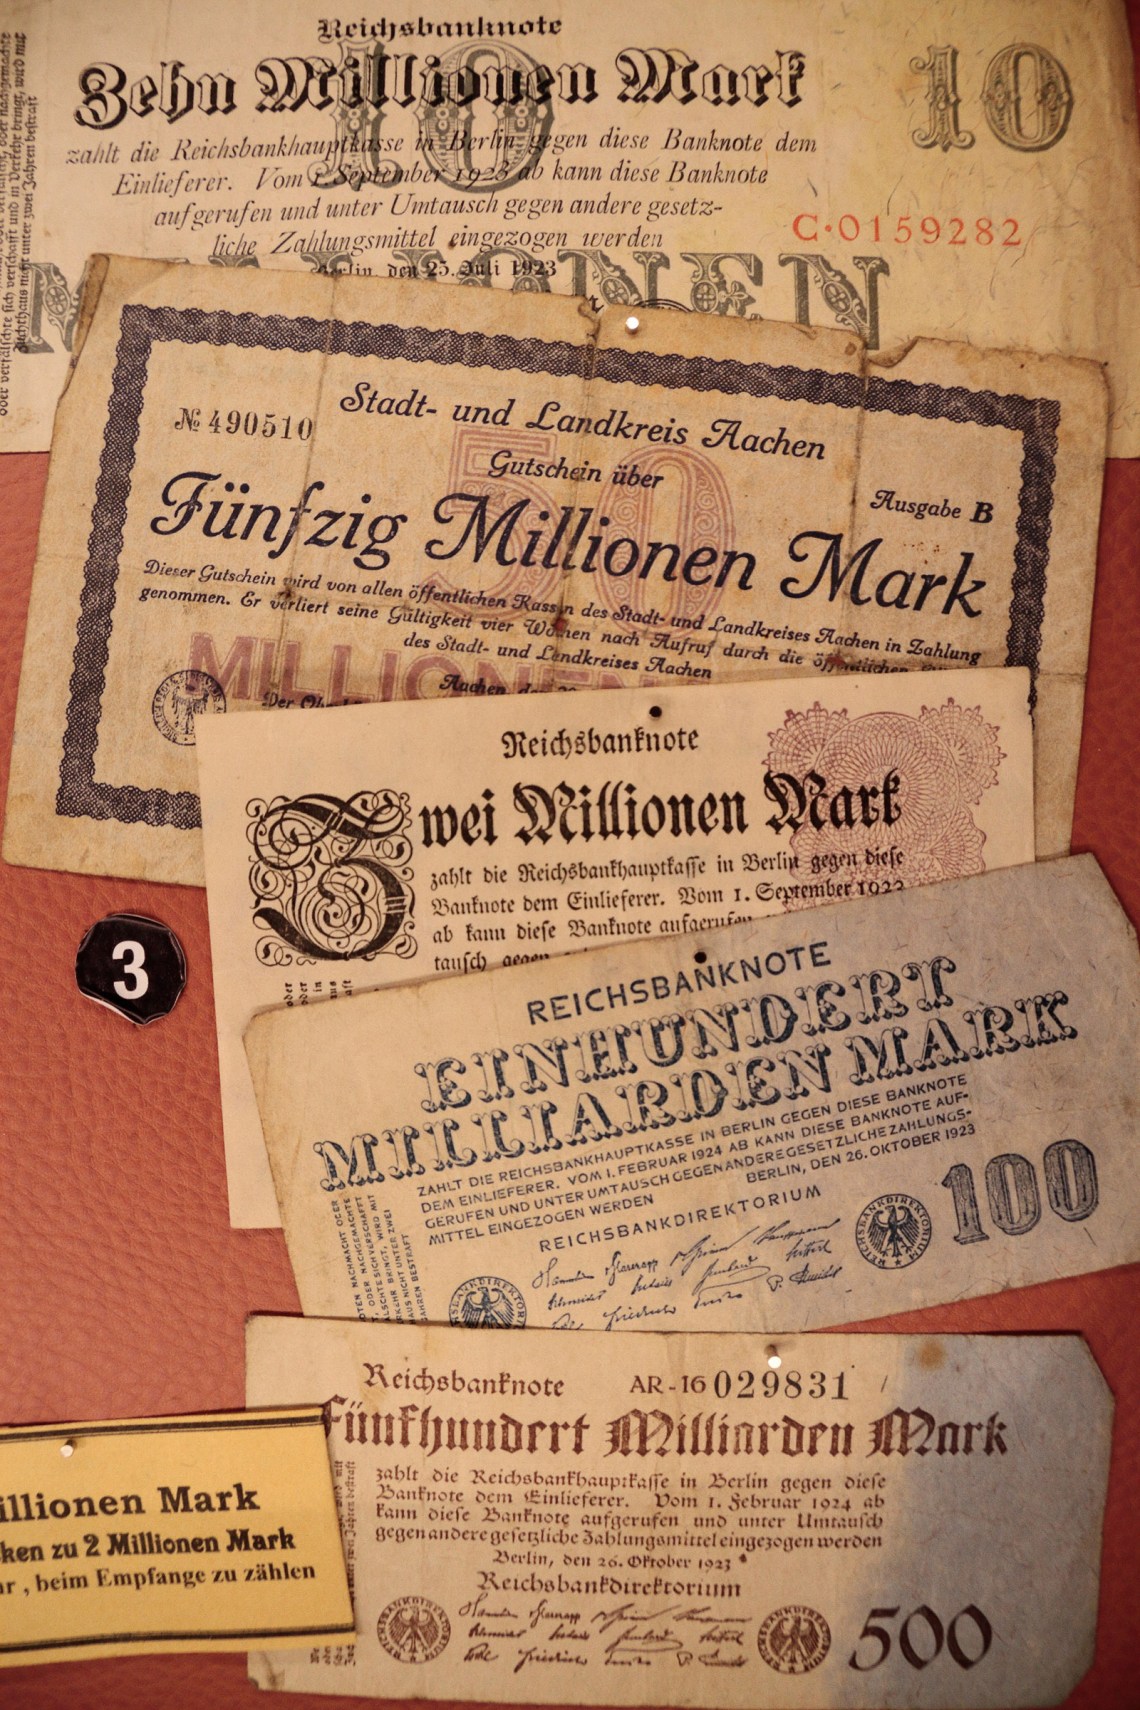 Banknotes ranging in value from two million to five hundred billion marks